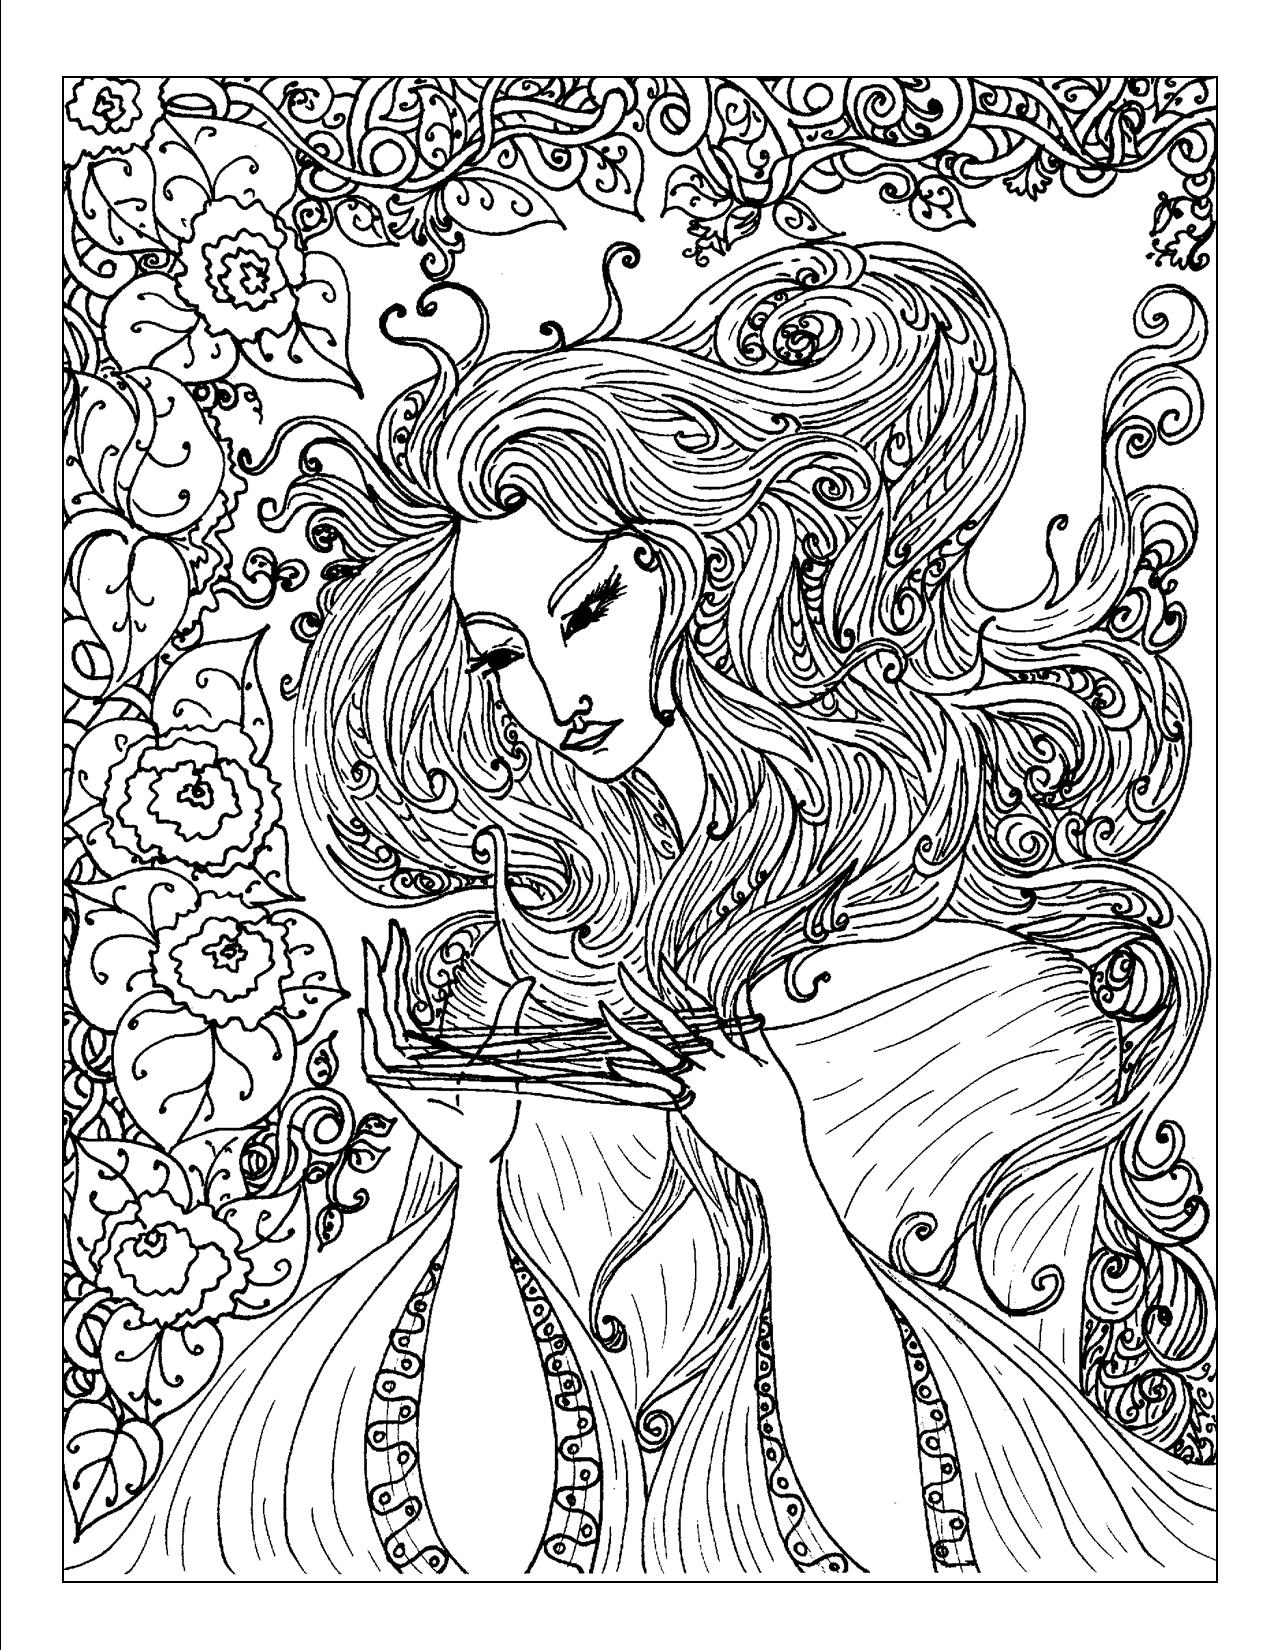  Complex Flower Coloring Pages - Complicated Flower